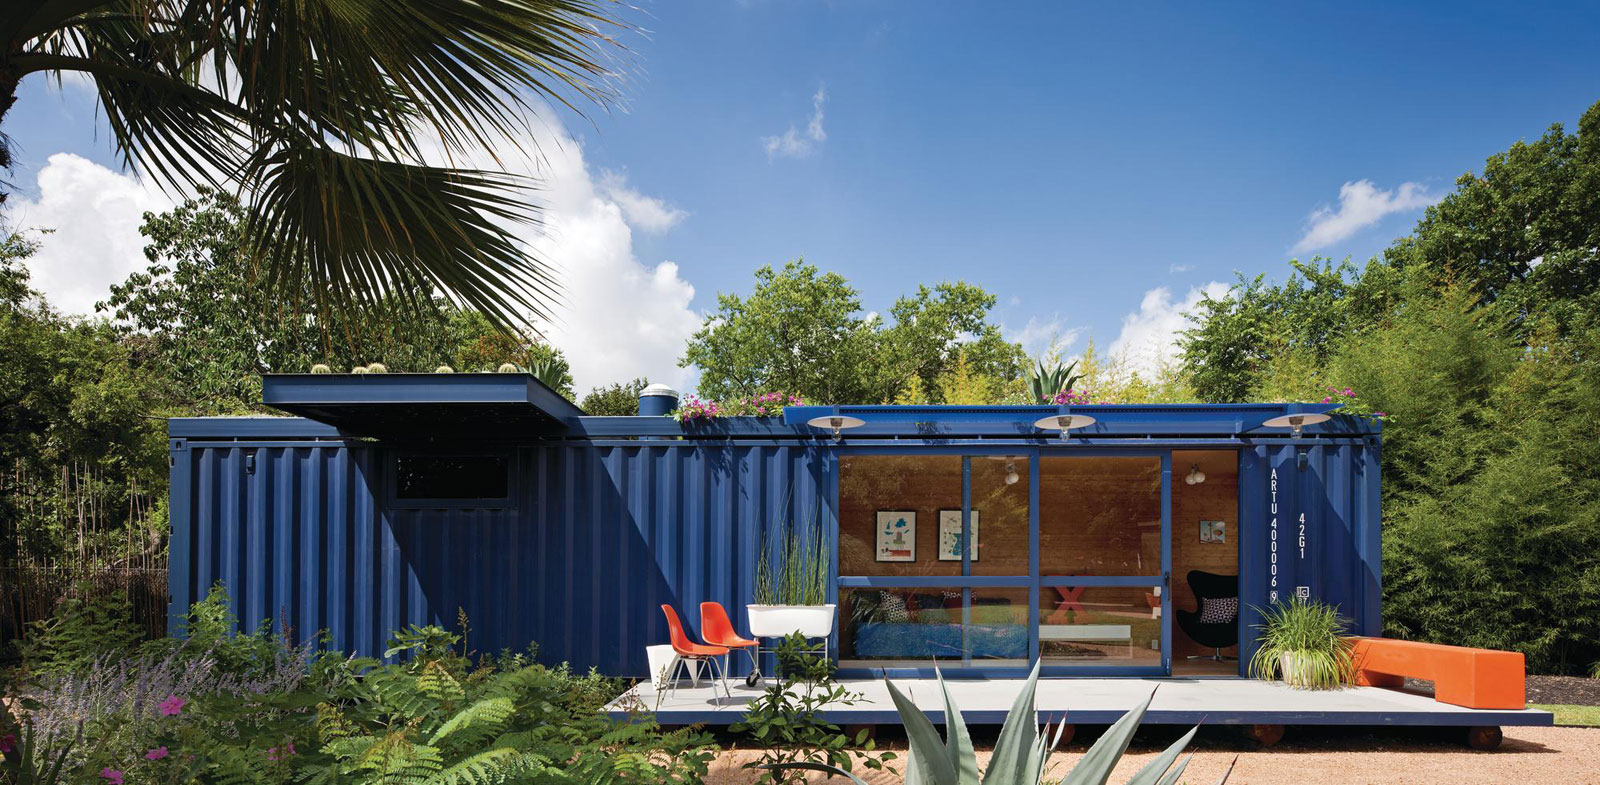 Shipping-Container-Guest-House-01